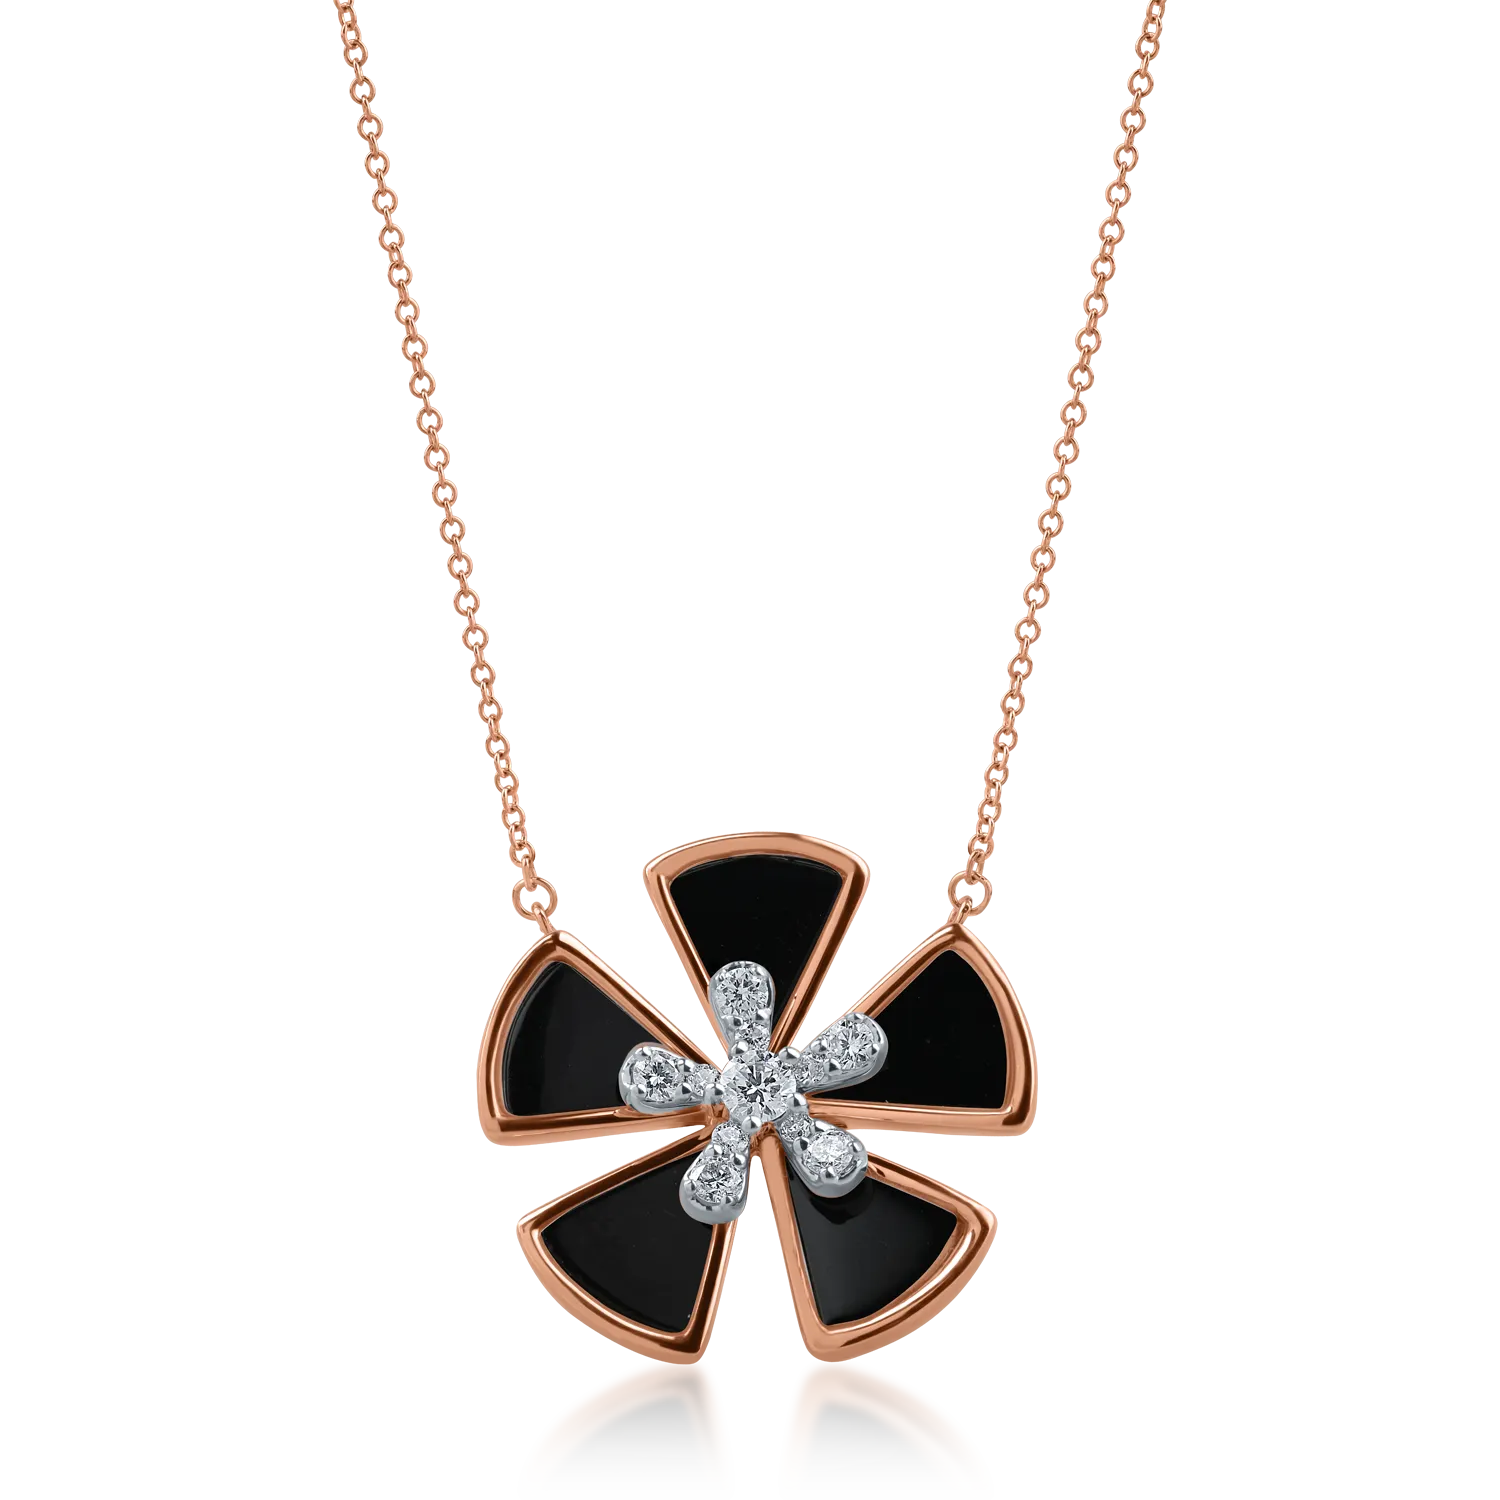 Rose gold flower pendant necklace with 2.64ct black onyx and 0.25ct diamonds